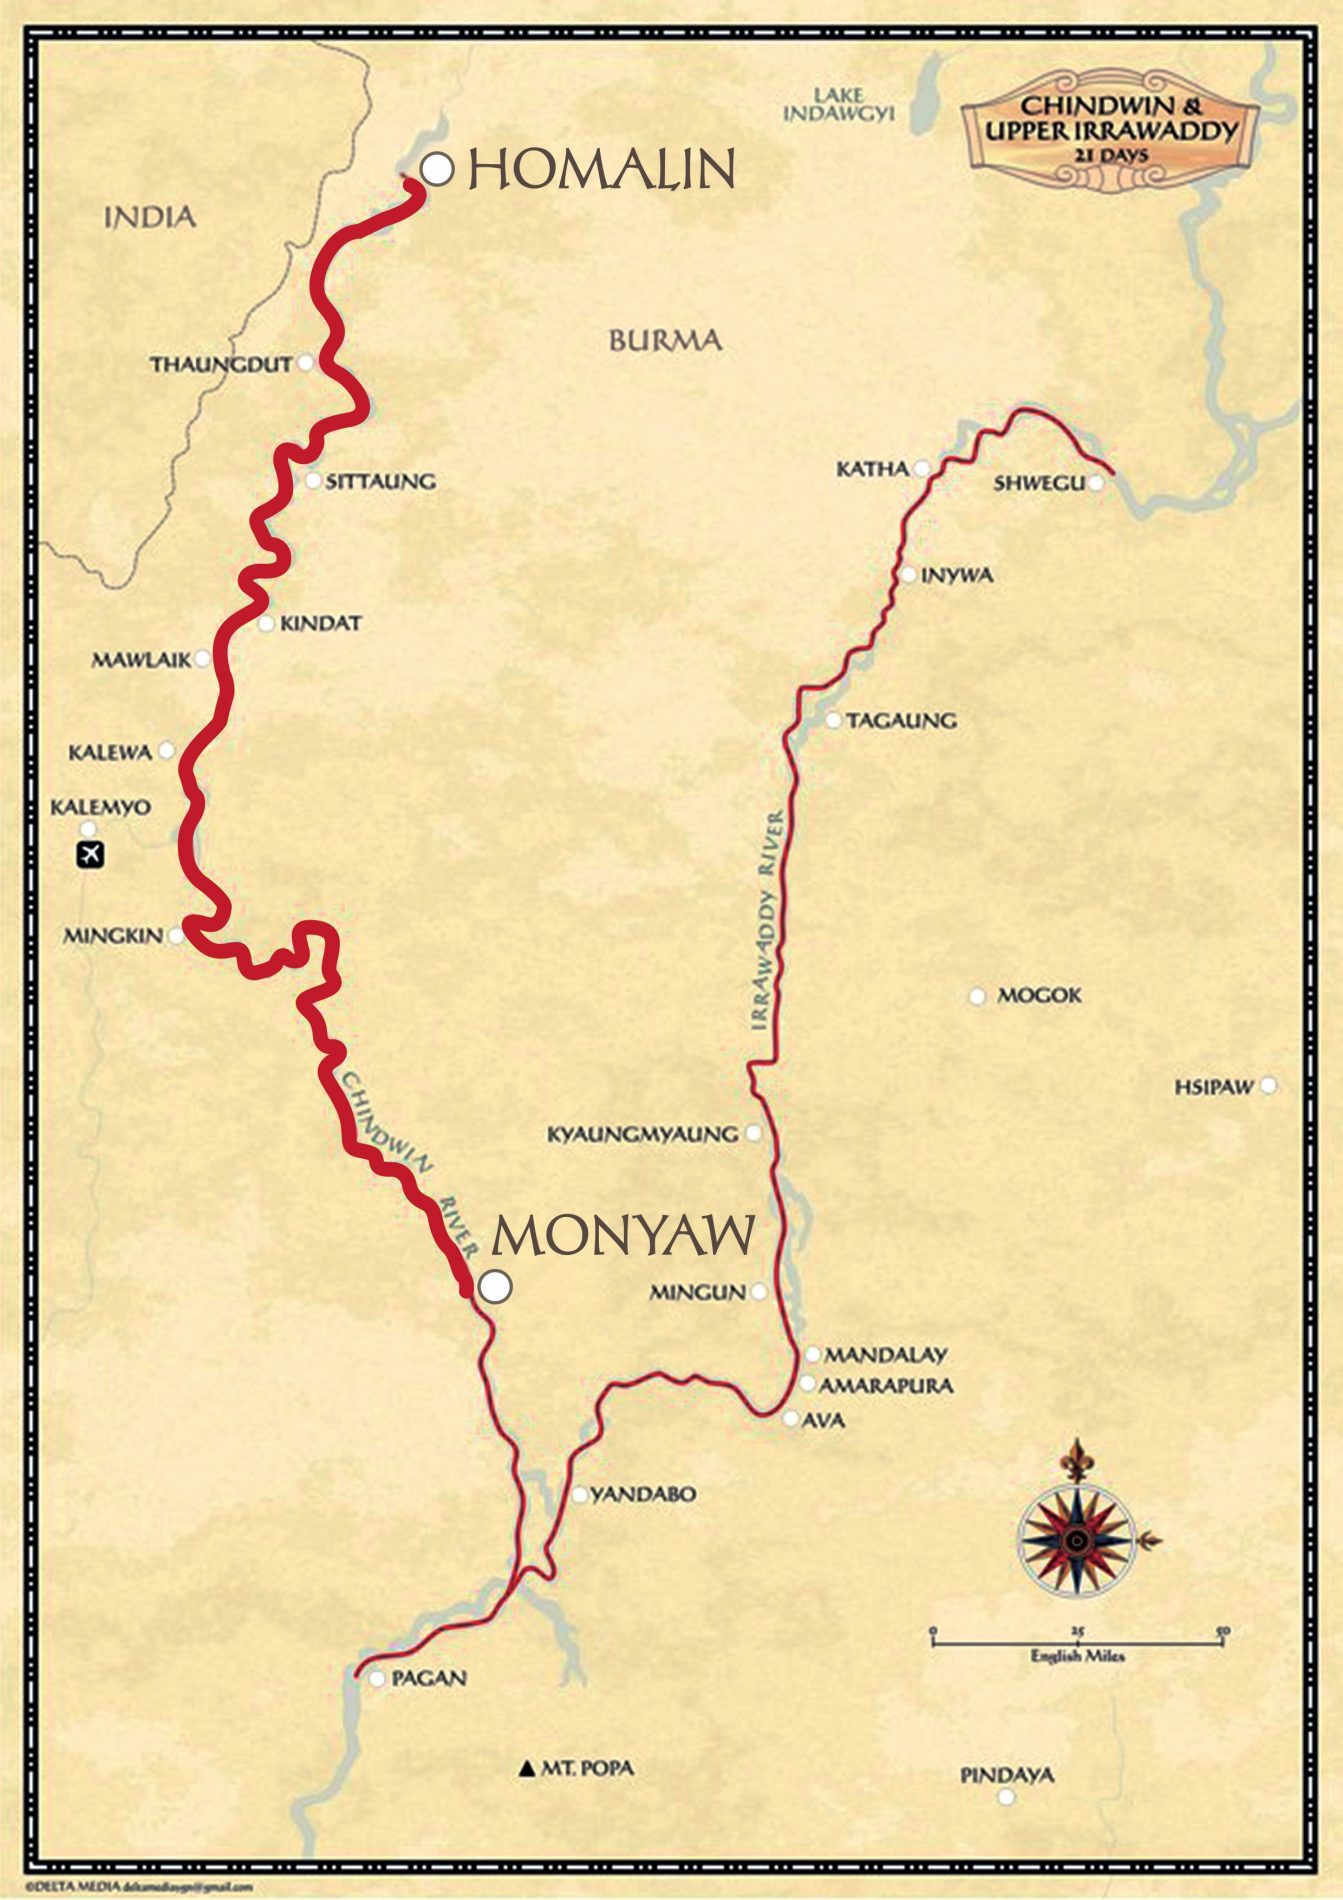 Pandaw Expeditions